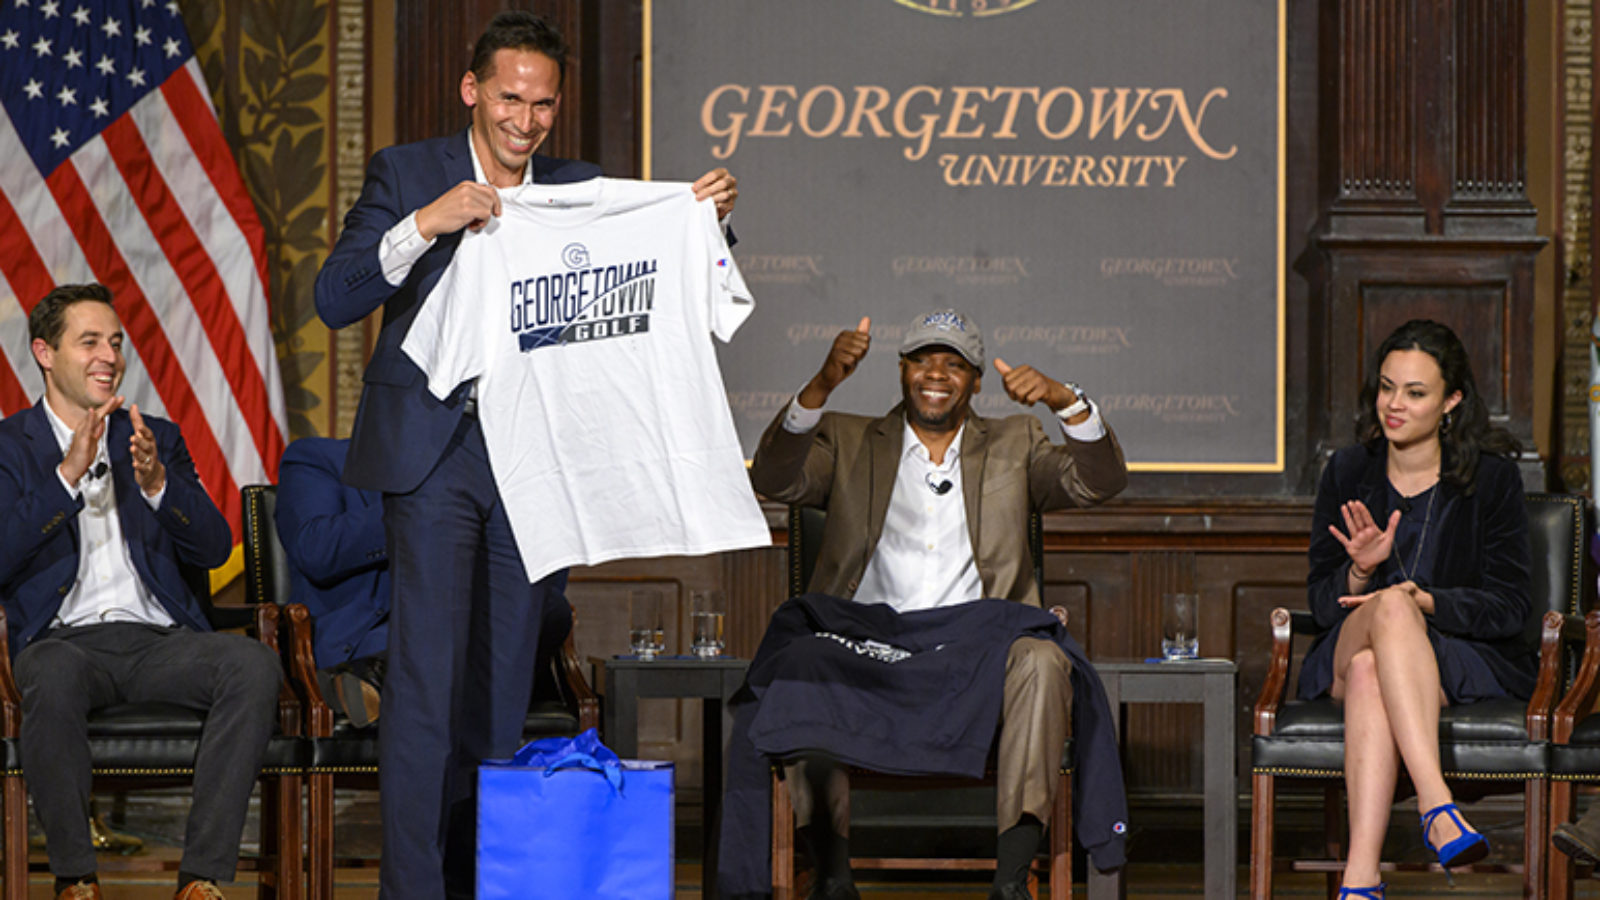 Marc Howard holds up Georgetown T-shirt as Valentino Dixon raises hands